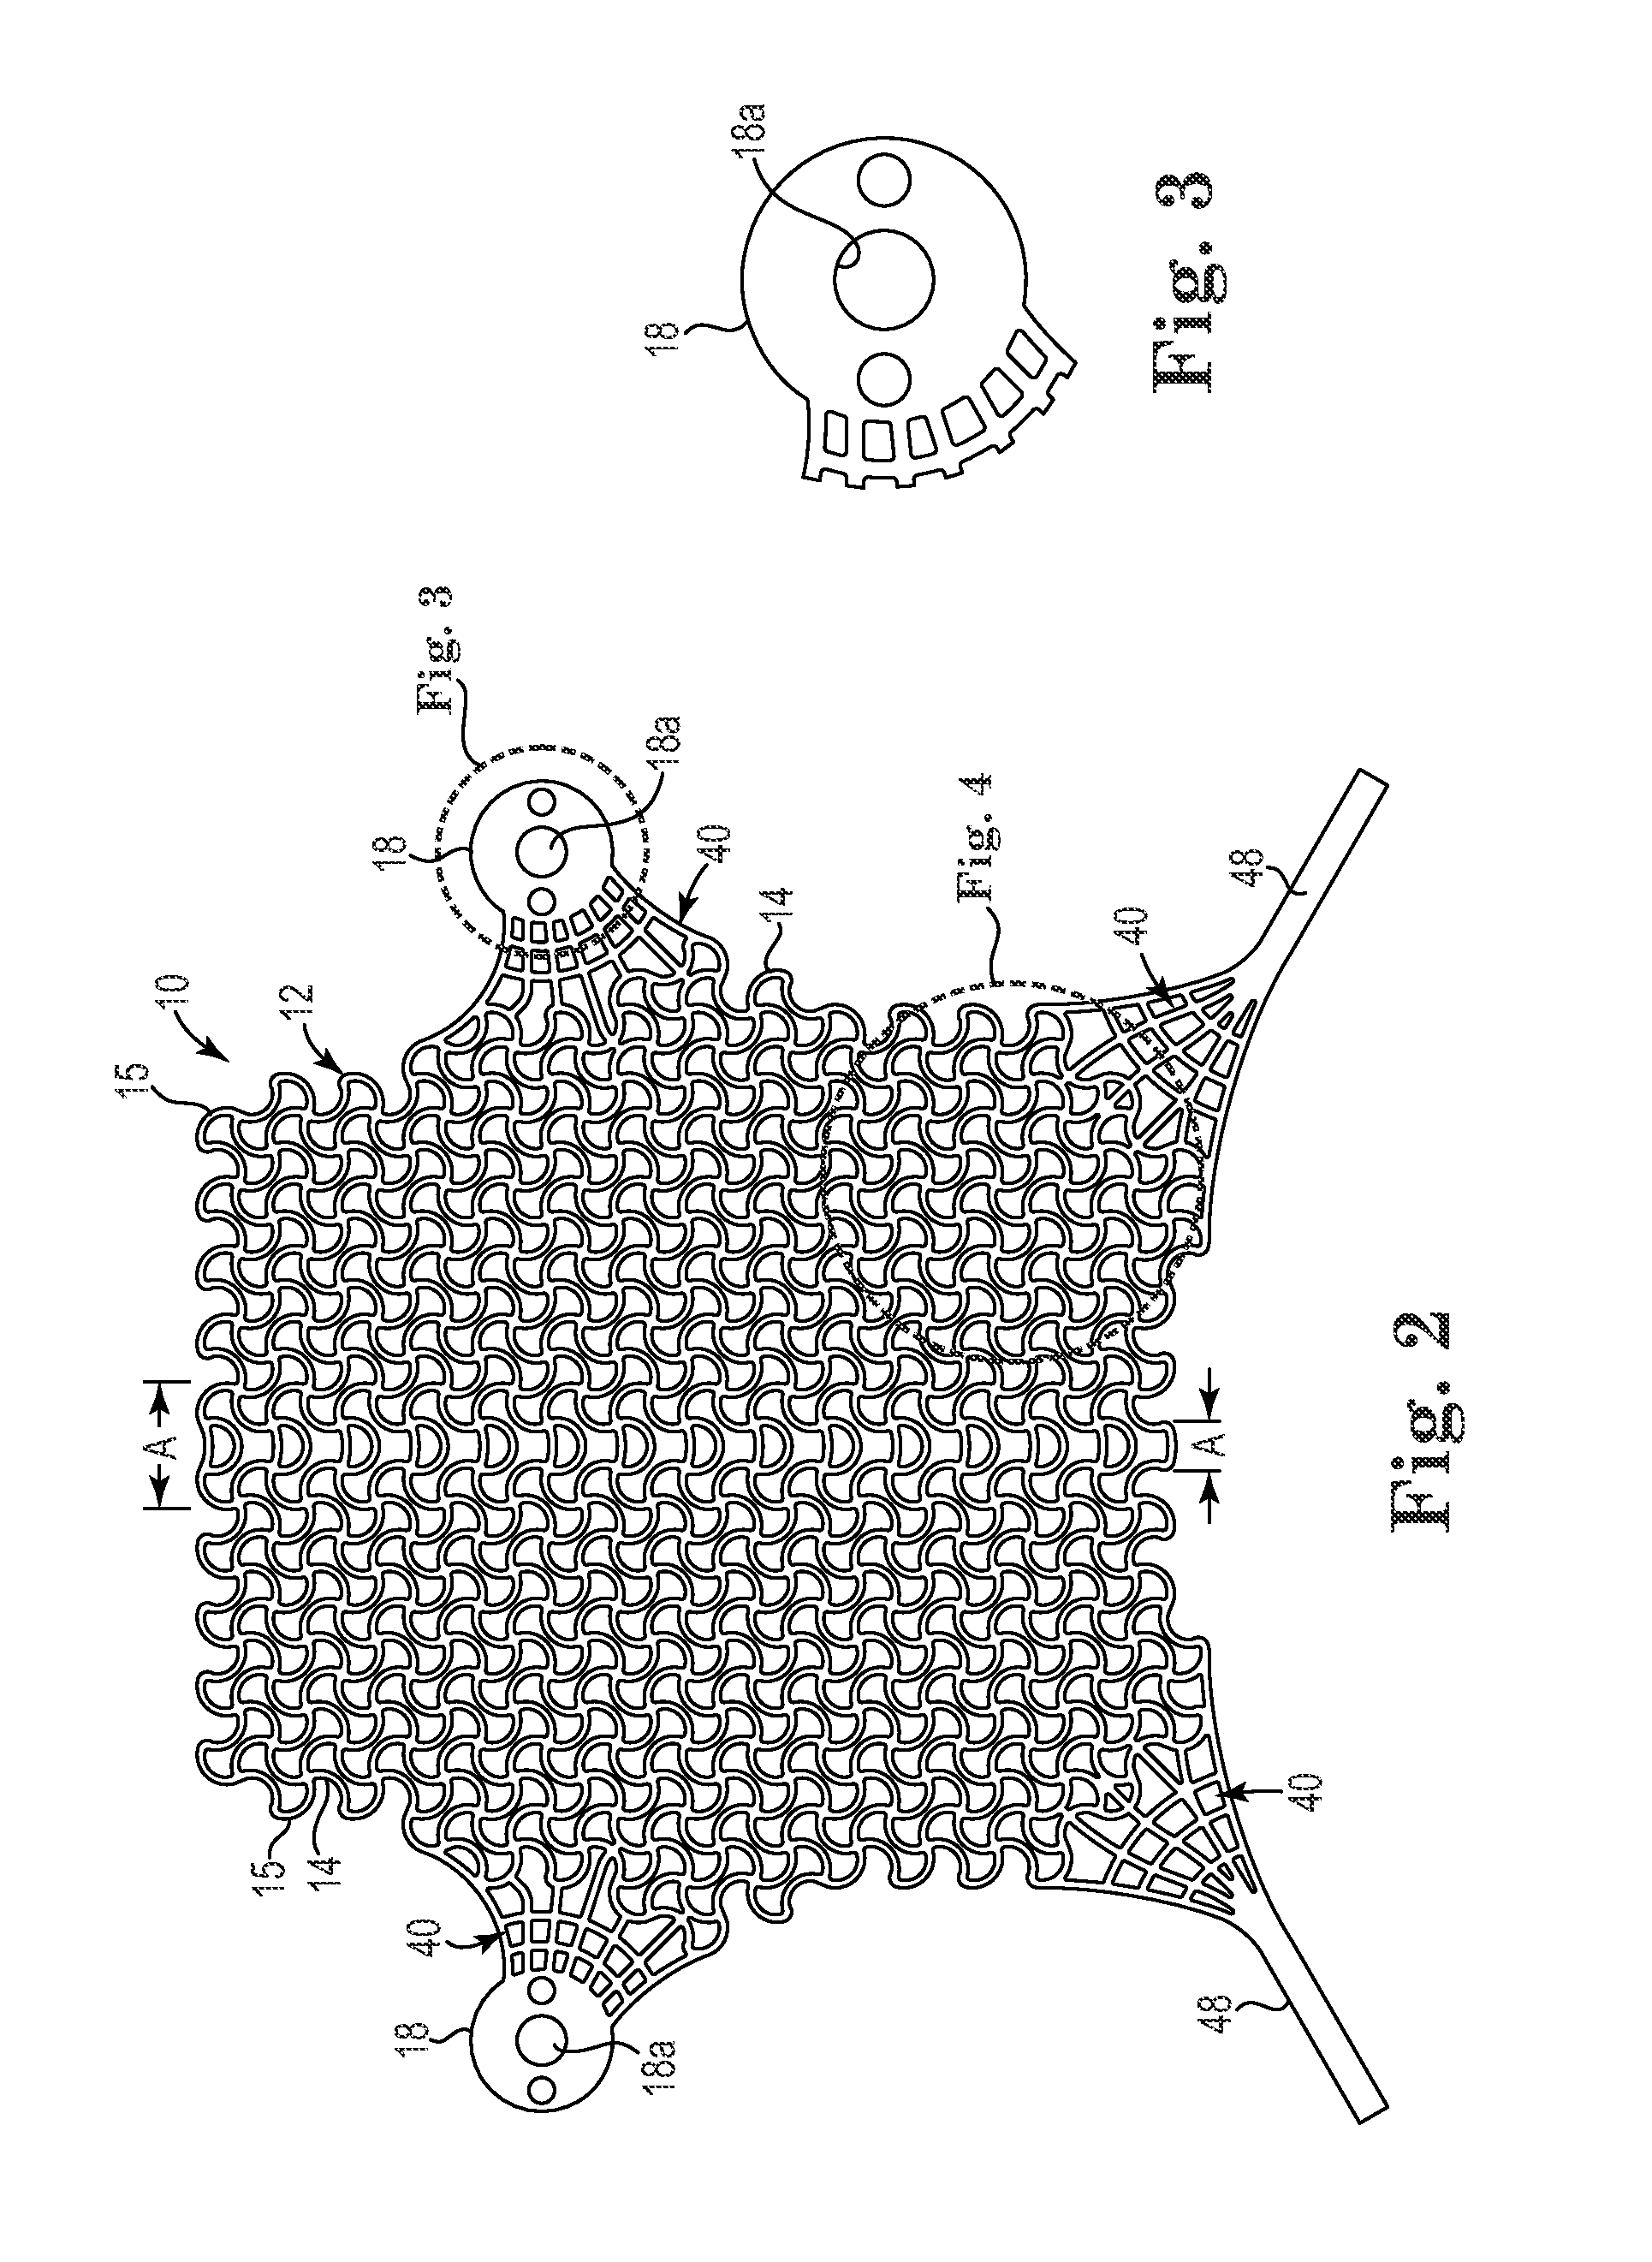 Patterned Implant and Method